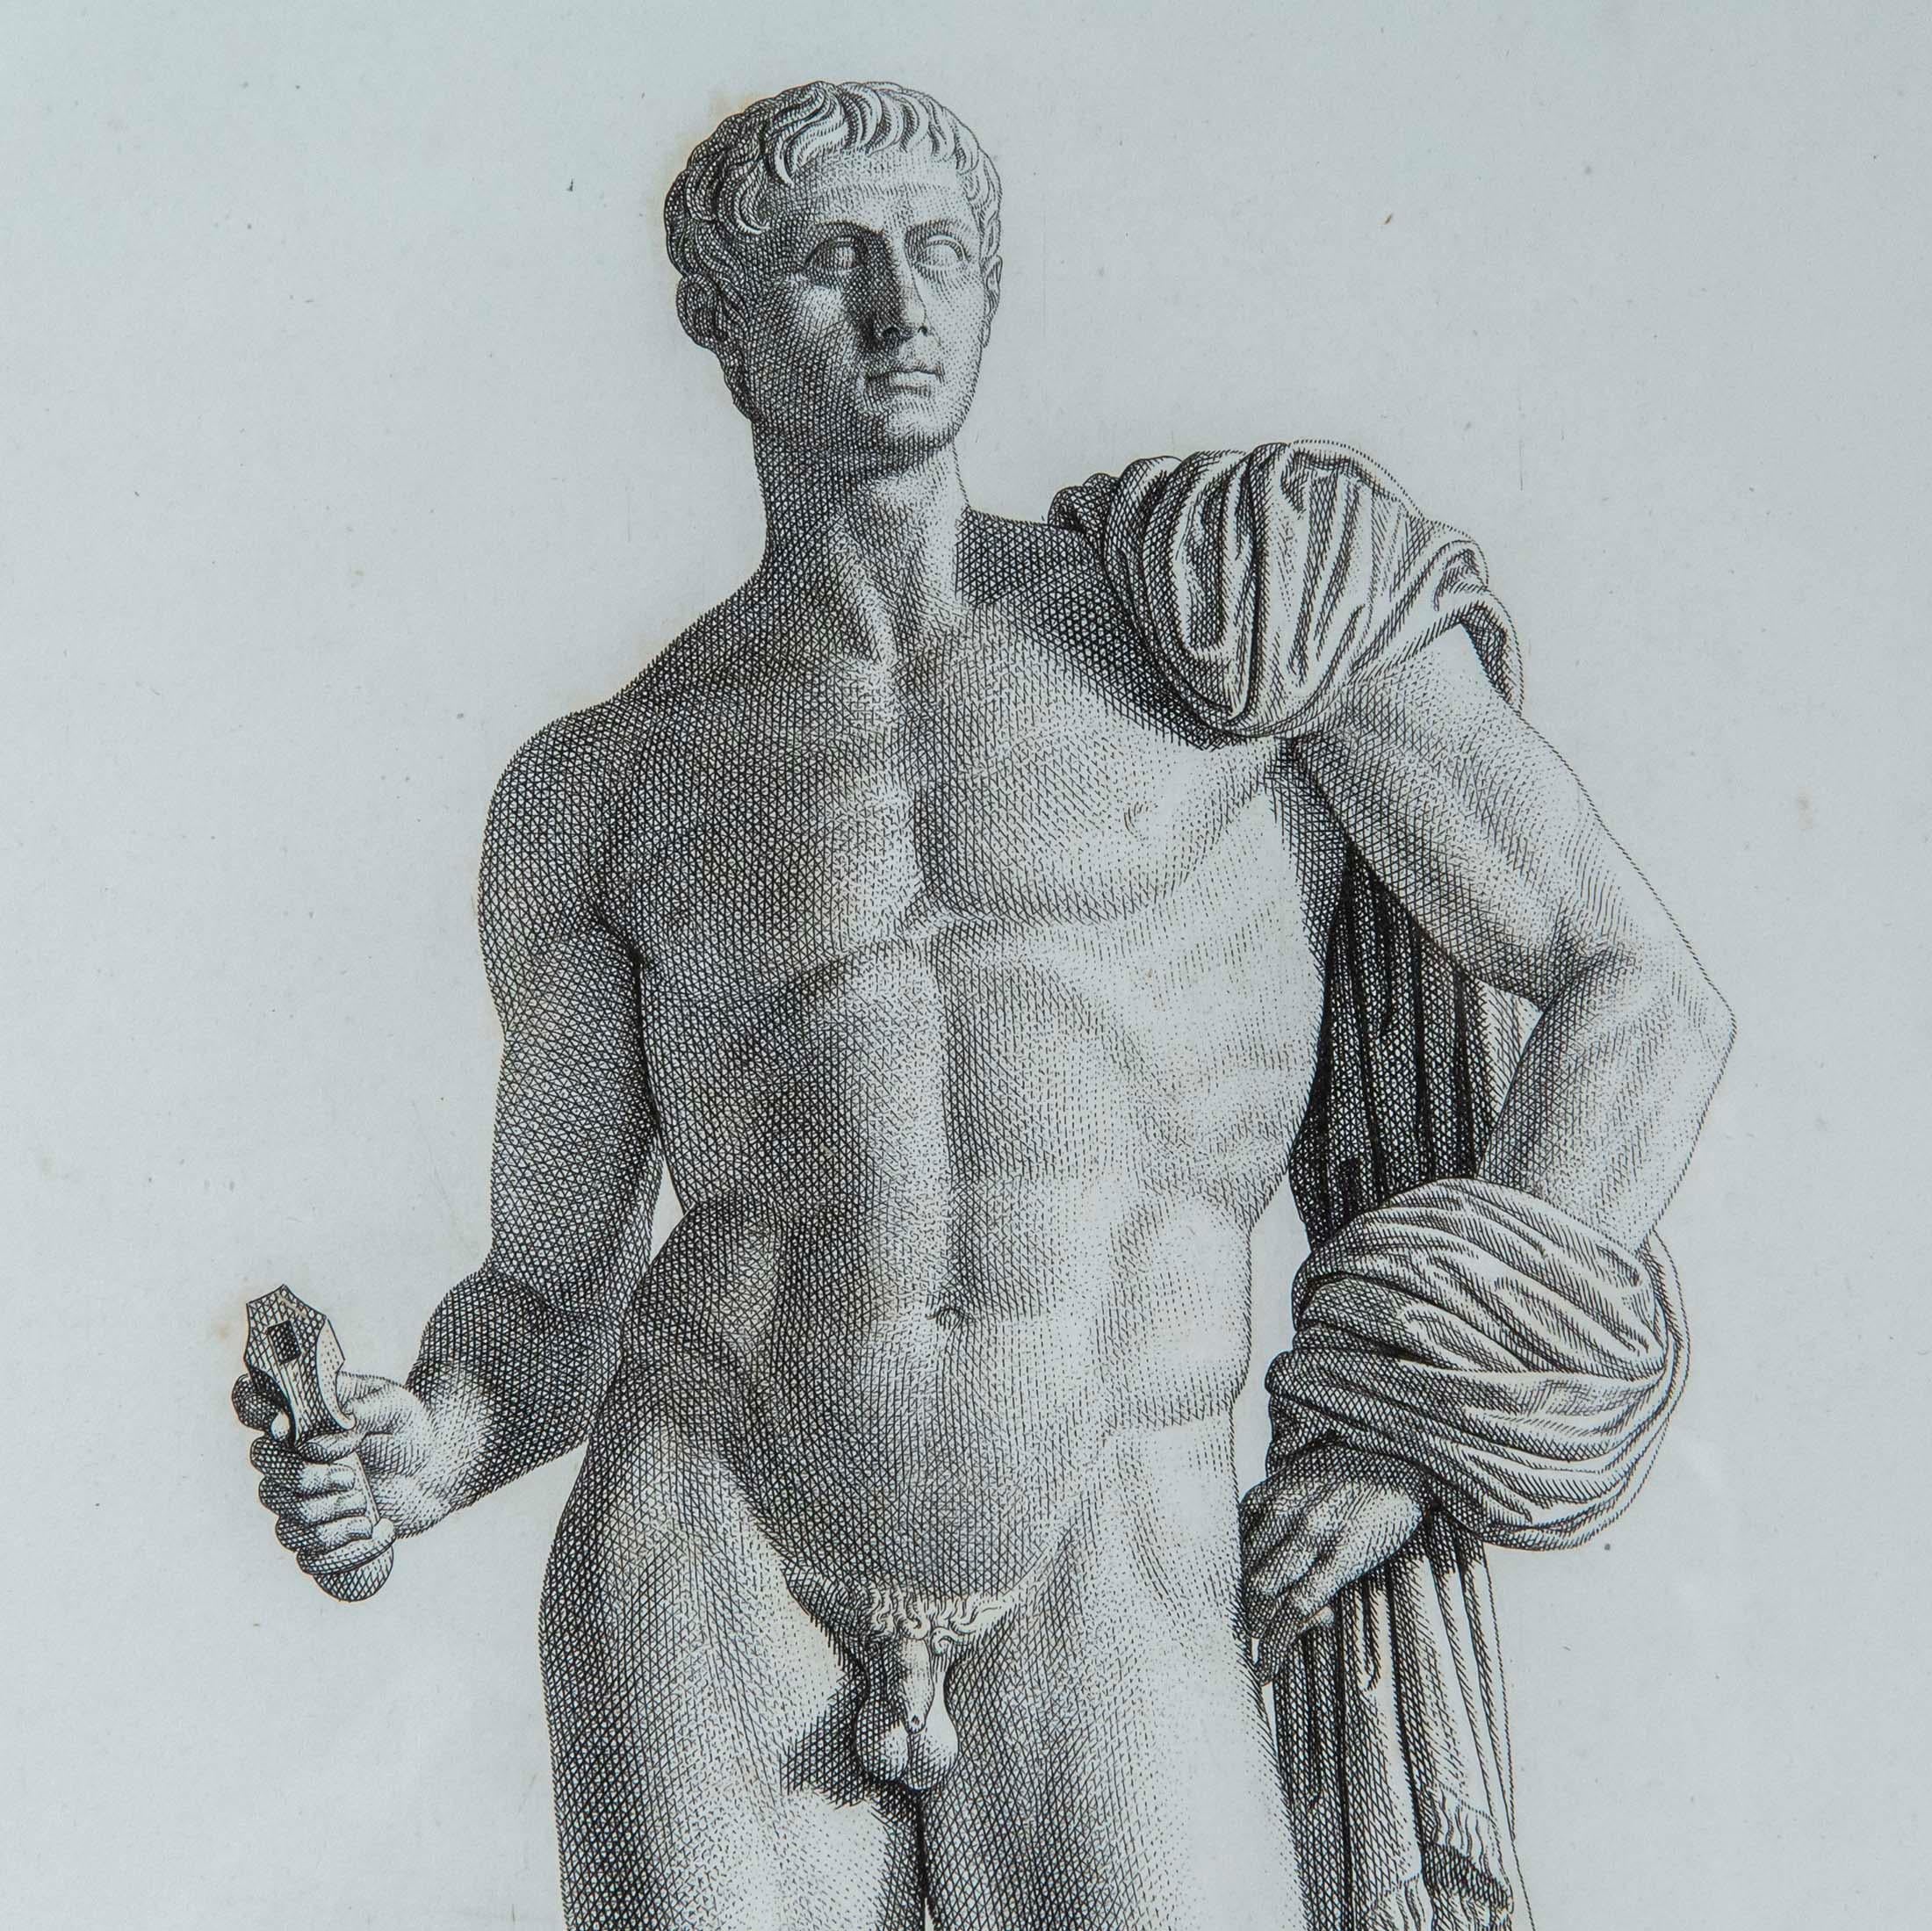 A pair of exquisite and rare etchings of ancient sculptures by Pierre Bouillon (1776-1831), from his book Musée des antiques, published in Paris between 1811-1827. The two plates, titled Germanicus and Sextus-Pompeius, depict the ancient marble